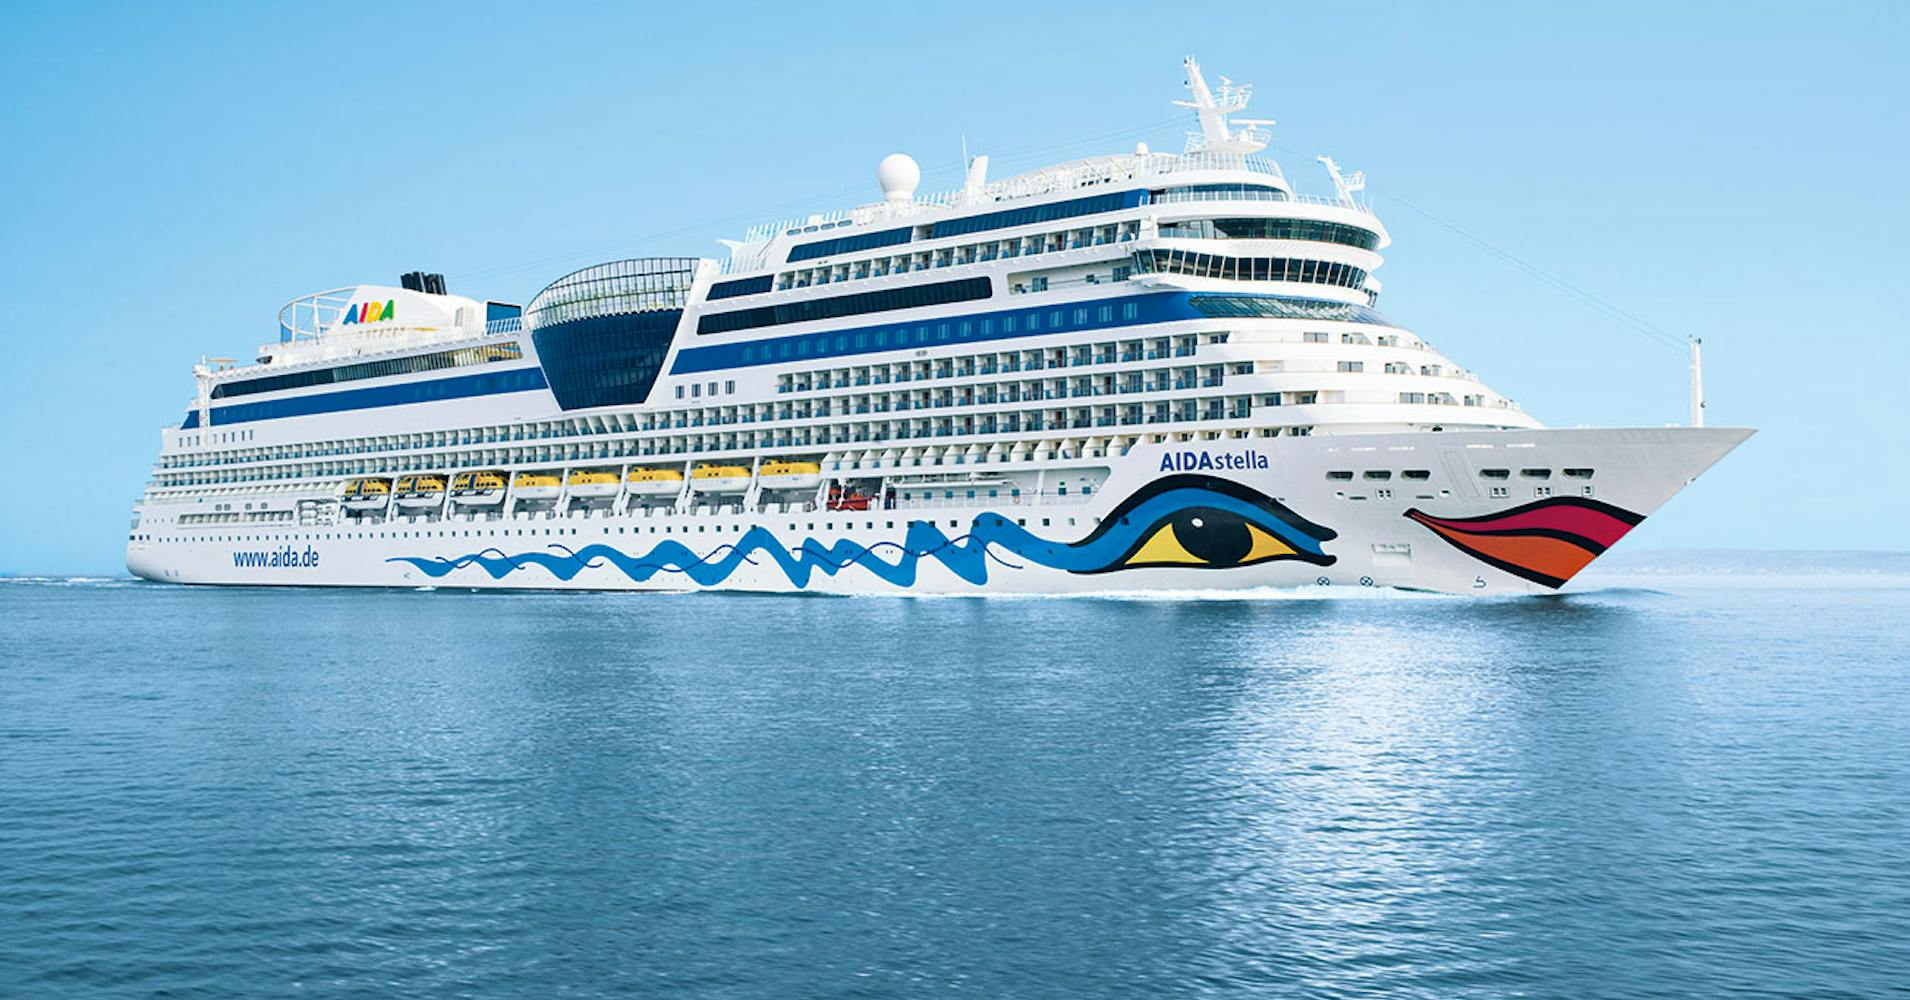 AIDA Cruises plans to become climate-neutral by 2040 | SWZ 